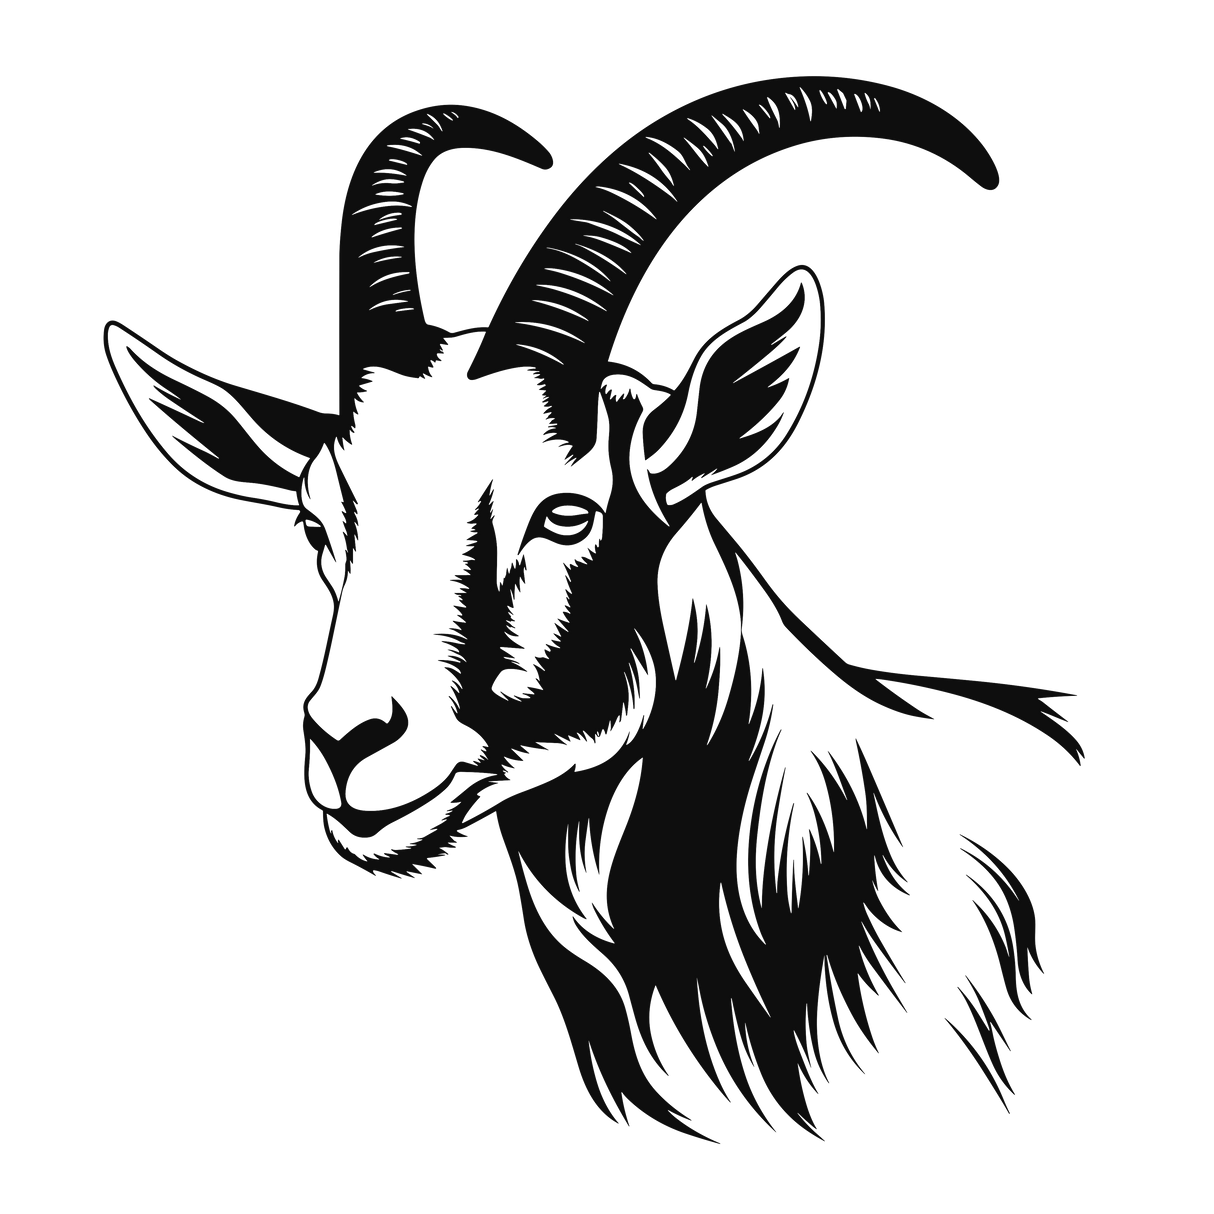 Graceful Goat Wall Decal - Bring Serenity to Your Space